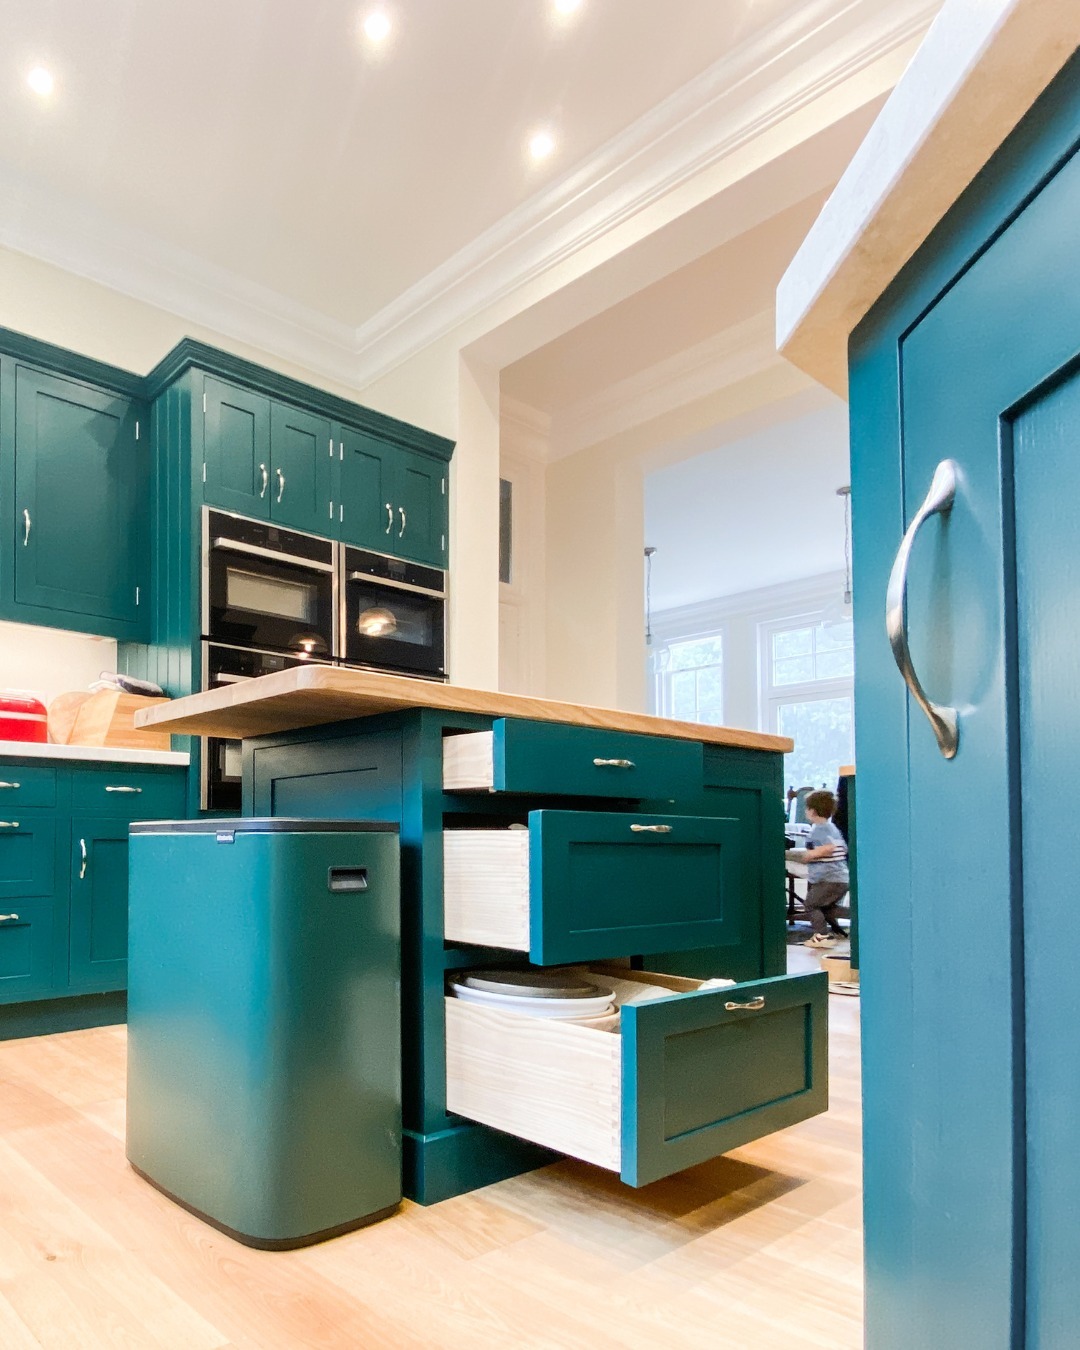 A teal kitchen with wooden floors.